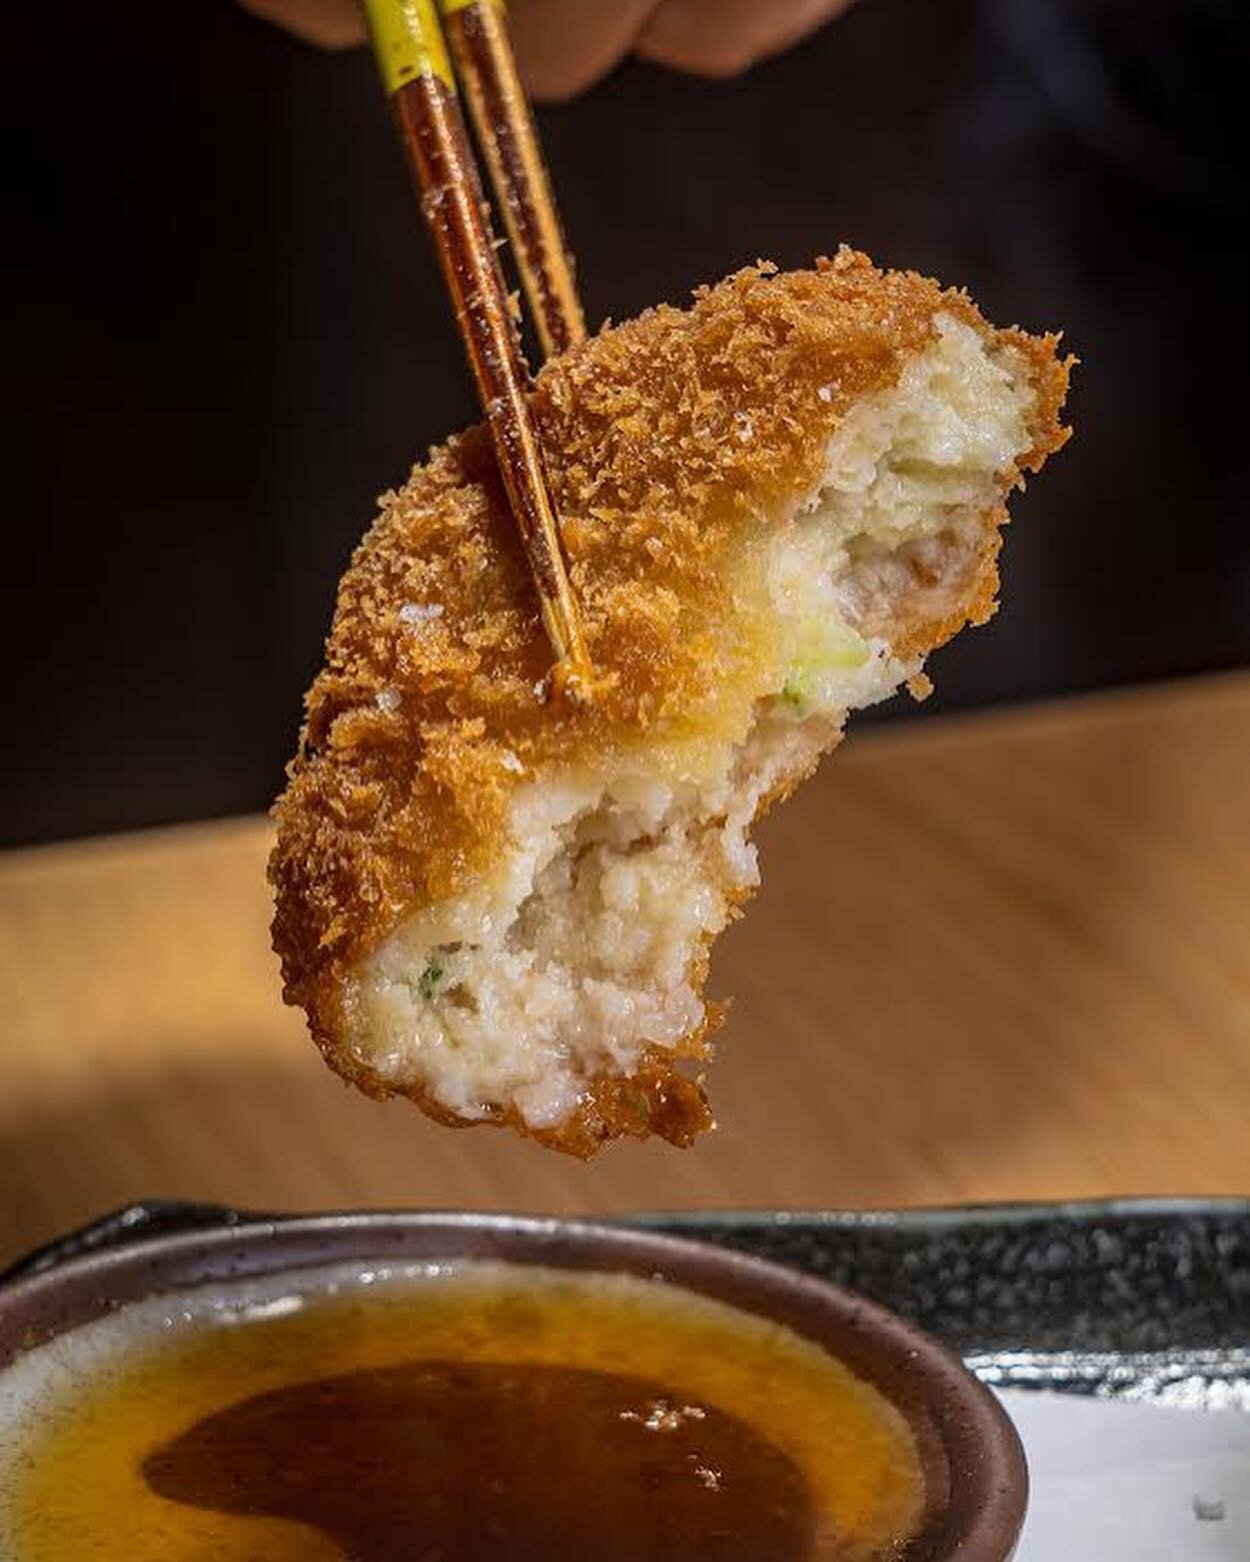 Cross section of the one and only shrimp &amp; scallop &ldquo;shinjo&rdquo; katsu by @chaep_dan 

Been a crowd favorite for a while but you better believe the team also enjoys throwing down a few of these at the end of the night with some post-shift 